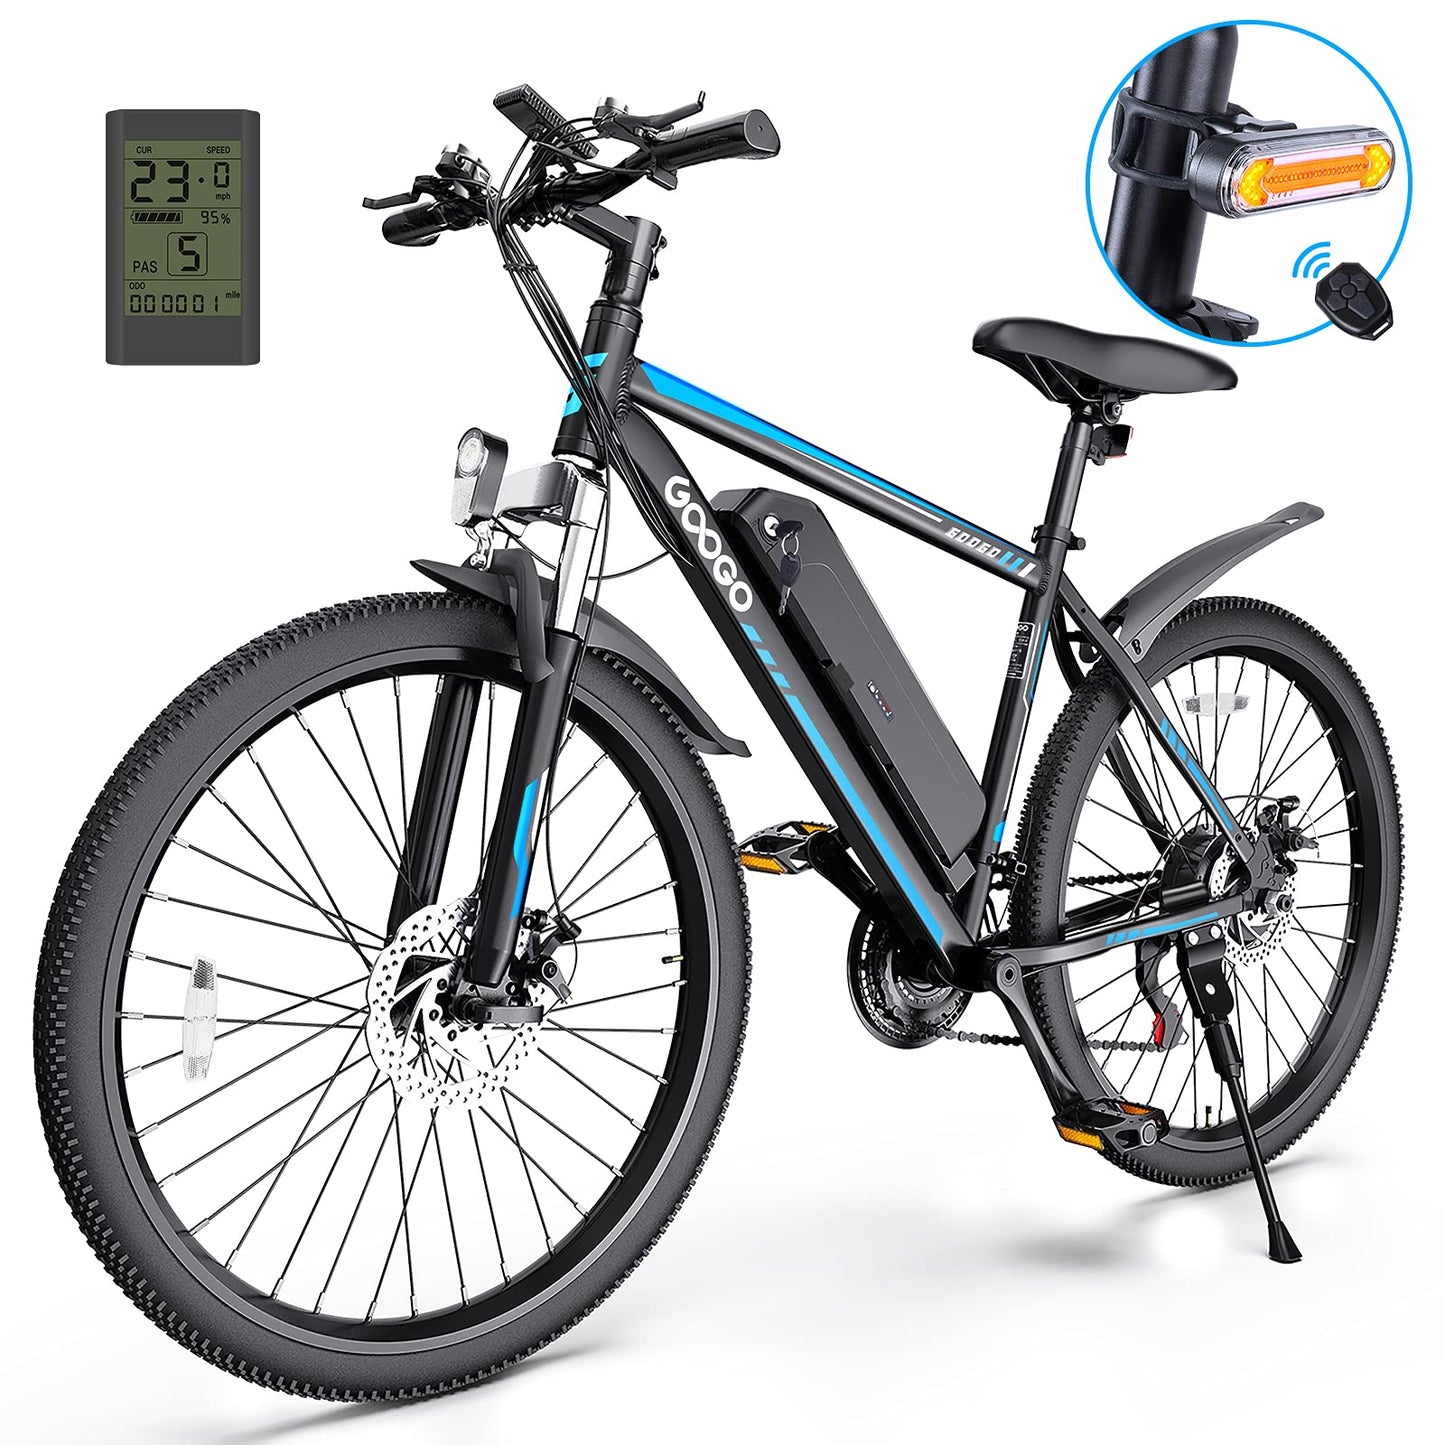 Electric Bike,Googo 26" Electric Mountain Bike with 350W Motor,Removable 36V Battery,Professional 21 Speed Gears,Middle 5 Speed LCD Display with USB,3 Working Modes,20MPH Electric Bike for Adults | Decor Gifts and More